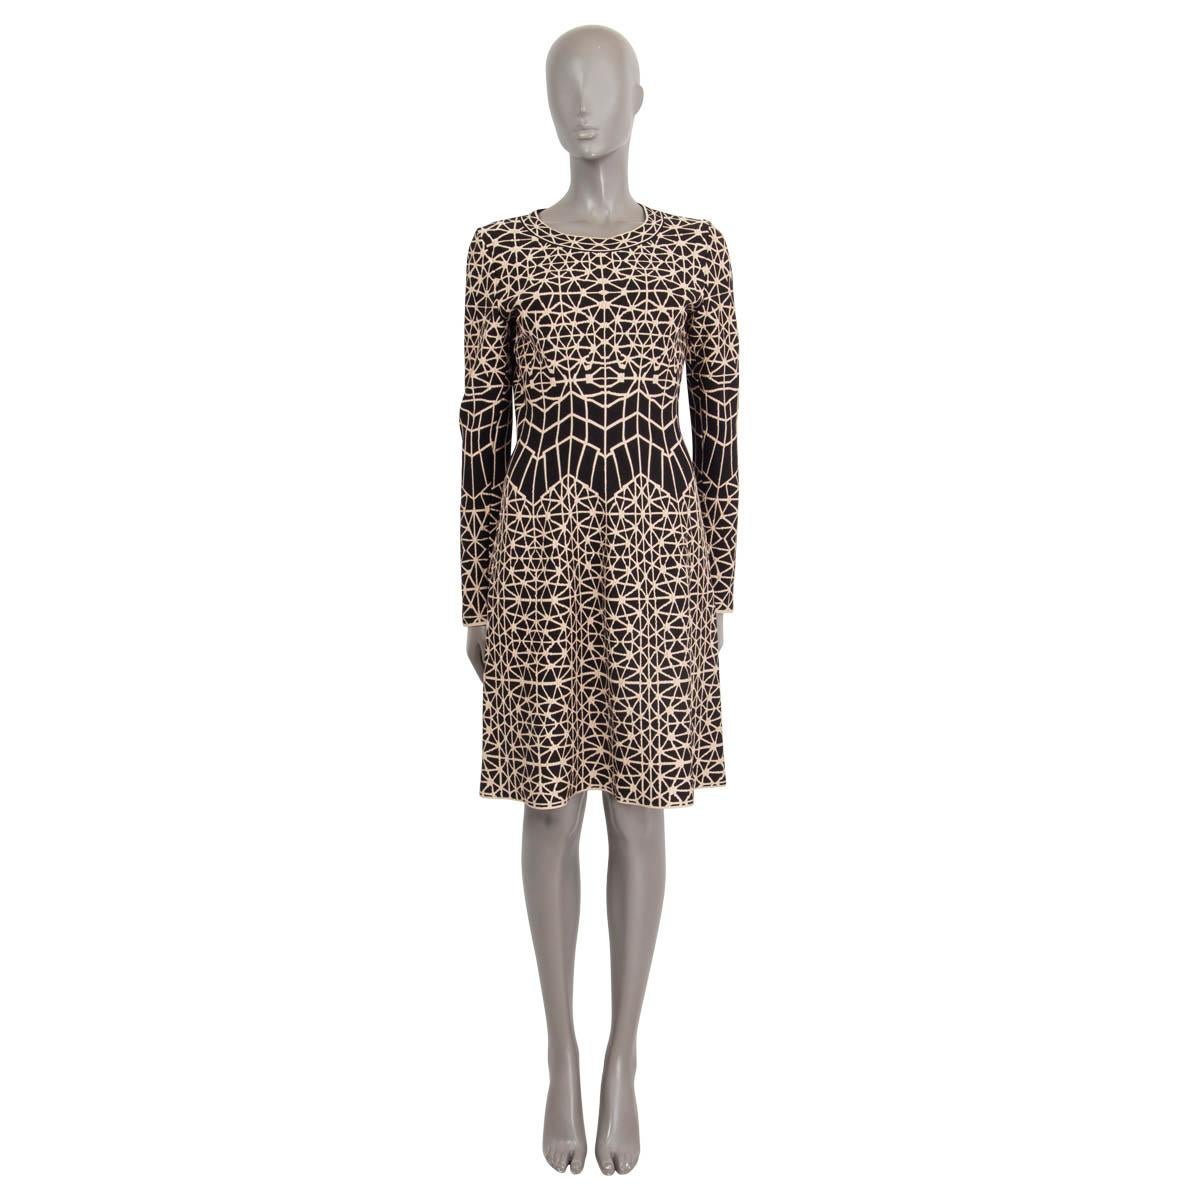 100% authentic Alaia geometric jacquard jersey dress in black and beige viscose (45%), wool (25%), nylon (20%), polyester (6%) and elastane (4%). Features long sleeves and a flared skirt. Opens with a concealed zipper on the back. Unlined. Has been